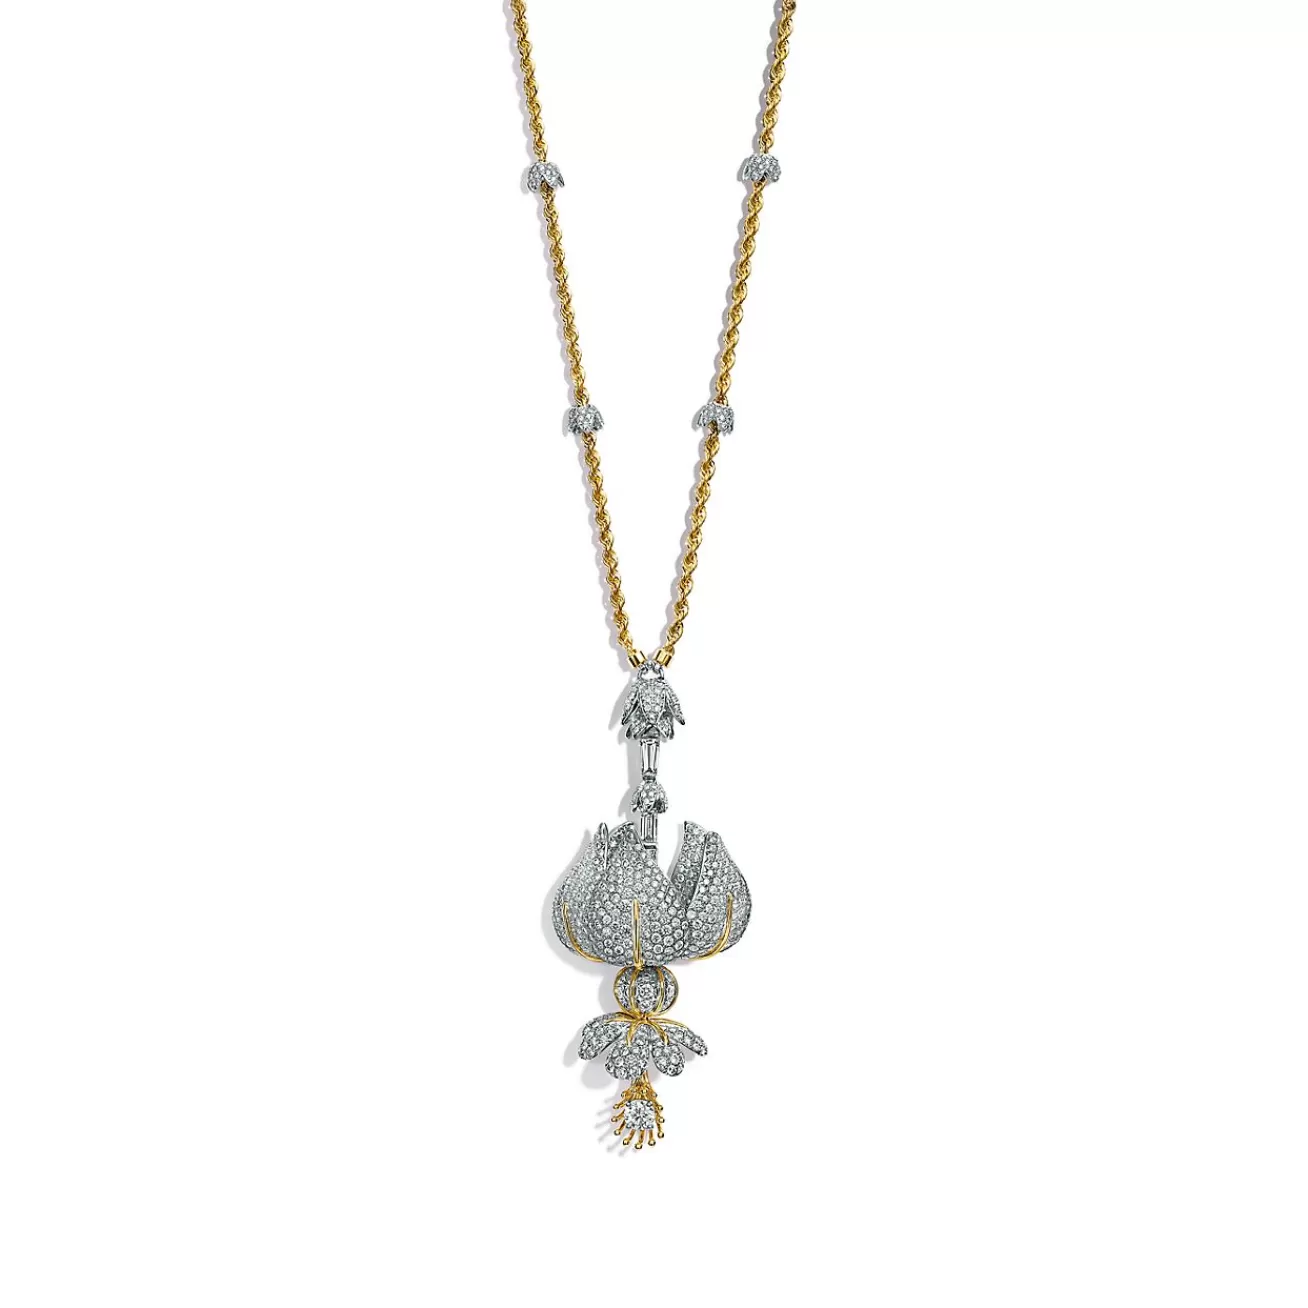 Tiffany & Co. Jean Schlumberger diamond flower pendant in 18k gold and platinum. | ^ Jean Schlumberger by Tiffany